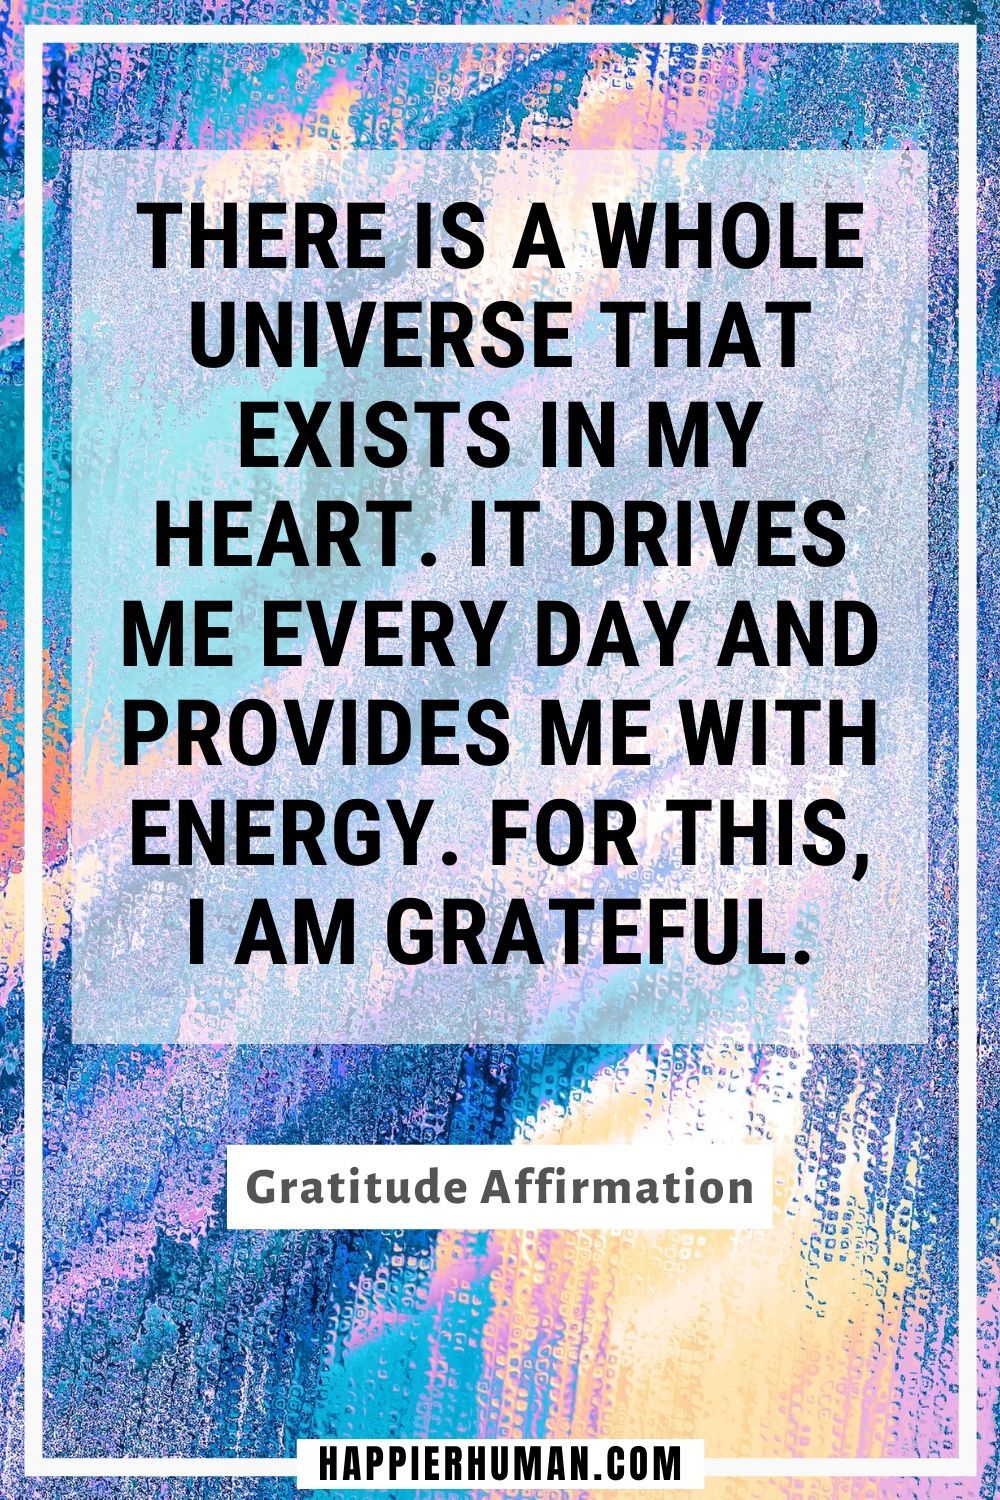 Gratitude Affirmations - There is a whole universe that exists in my heart. It drives me every day and provides me with energy. For this, I am grateful. | list of gratitude affirmations | positive gratitude affirmations | powerful gratitude affirmations #gratitude #gratitudeattitude #gratitudeisthebestattitude